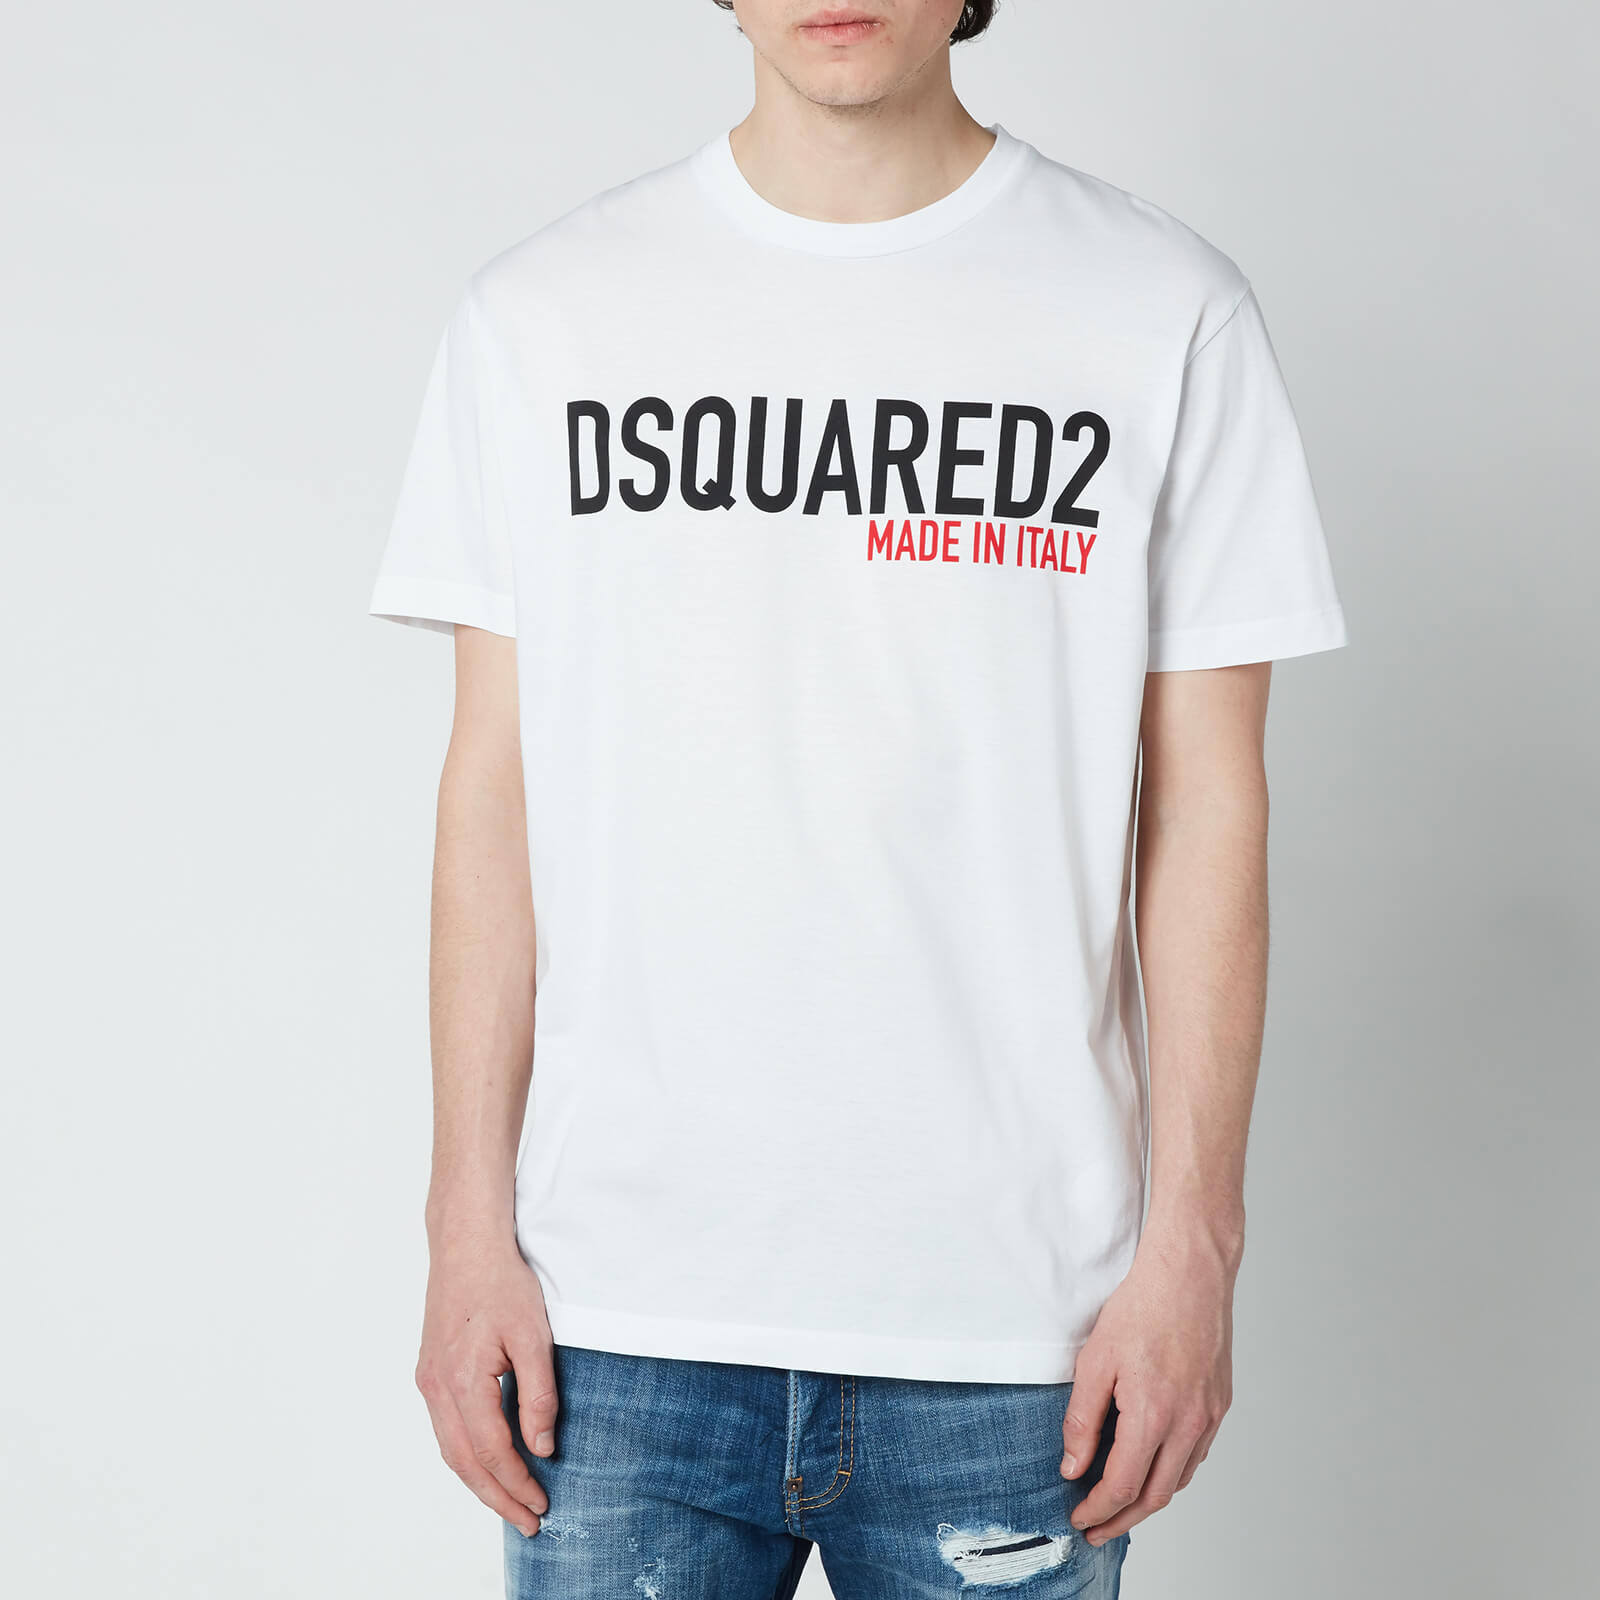 Dsquared2 Men's Made in Italy T-Shirt - White - XL